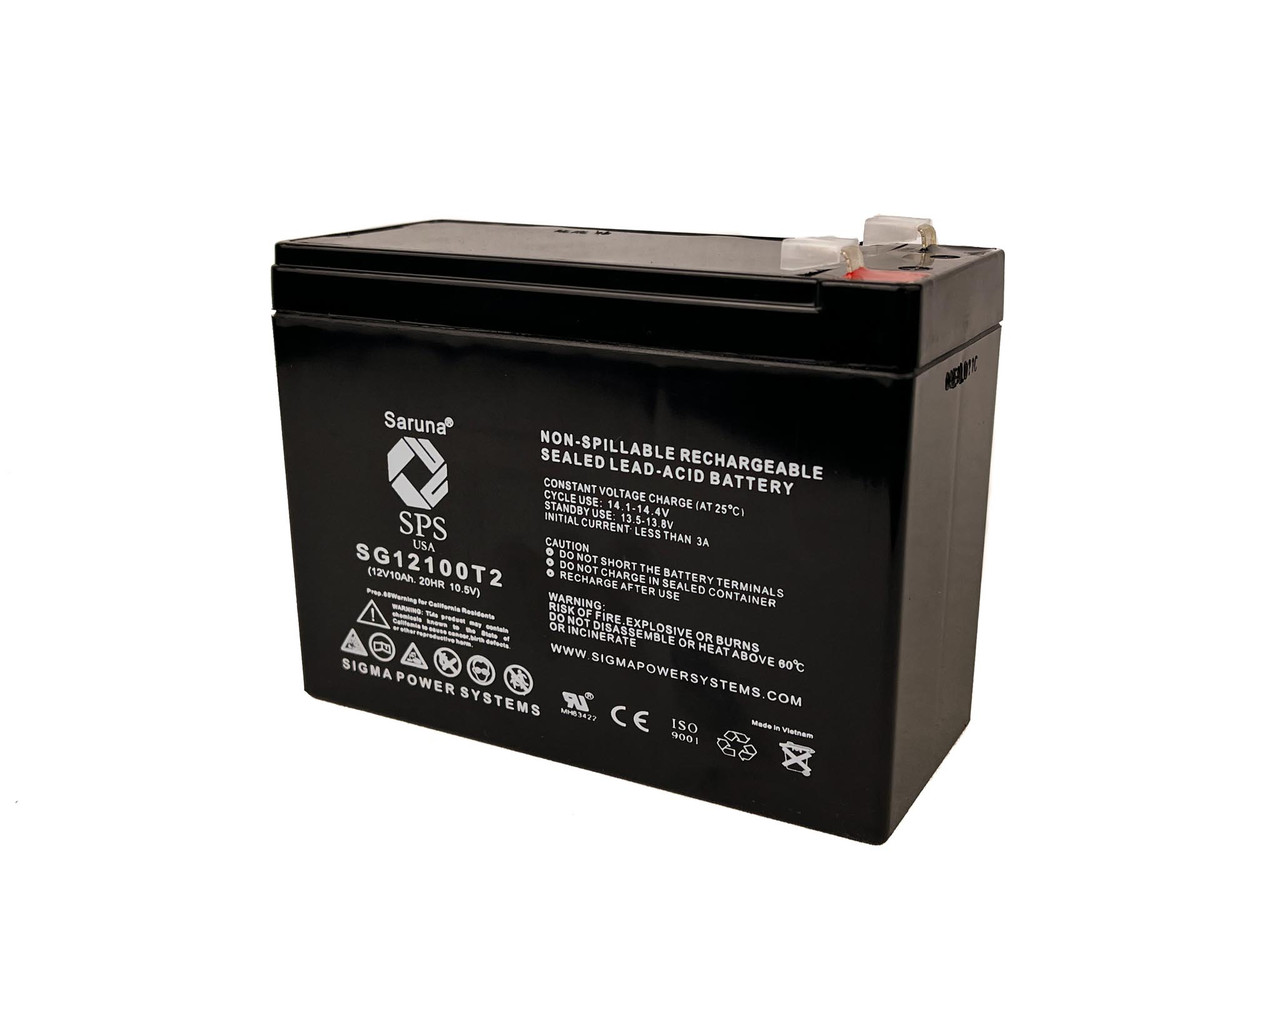 Raion Power 12V 10Ah Non-Spillable Replacement Rechargebale Battery for EWheels EW-18 Stand-N-Ride